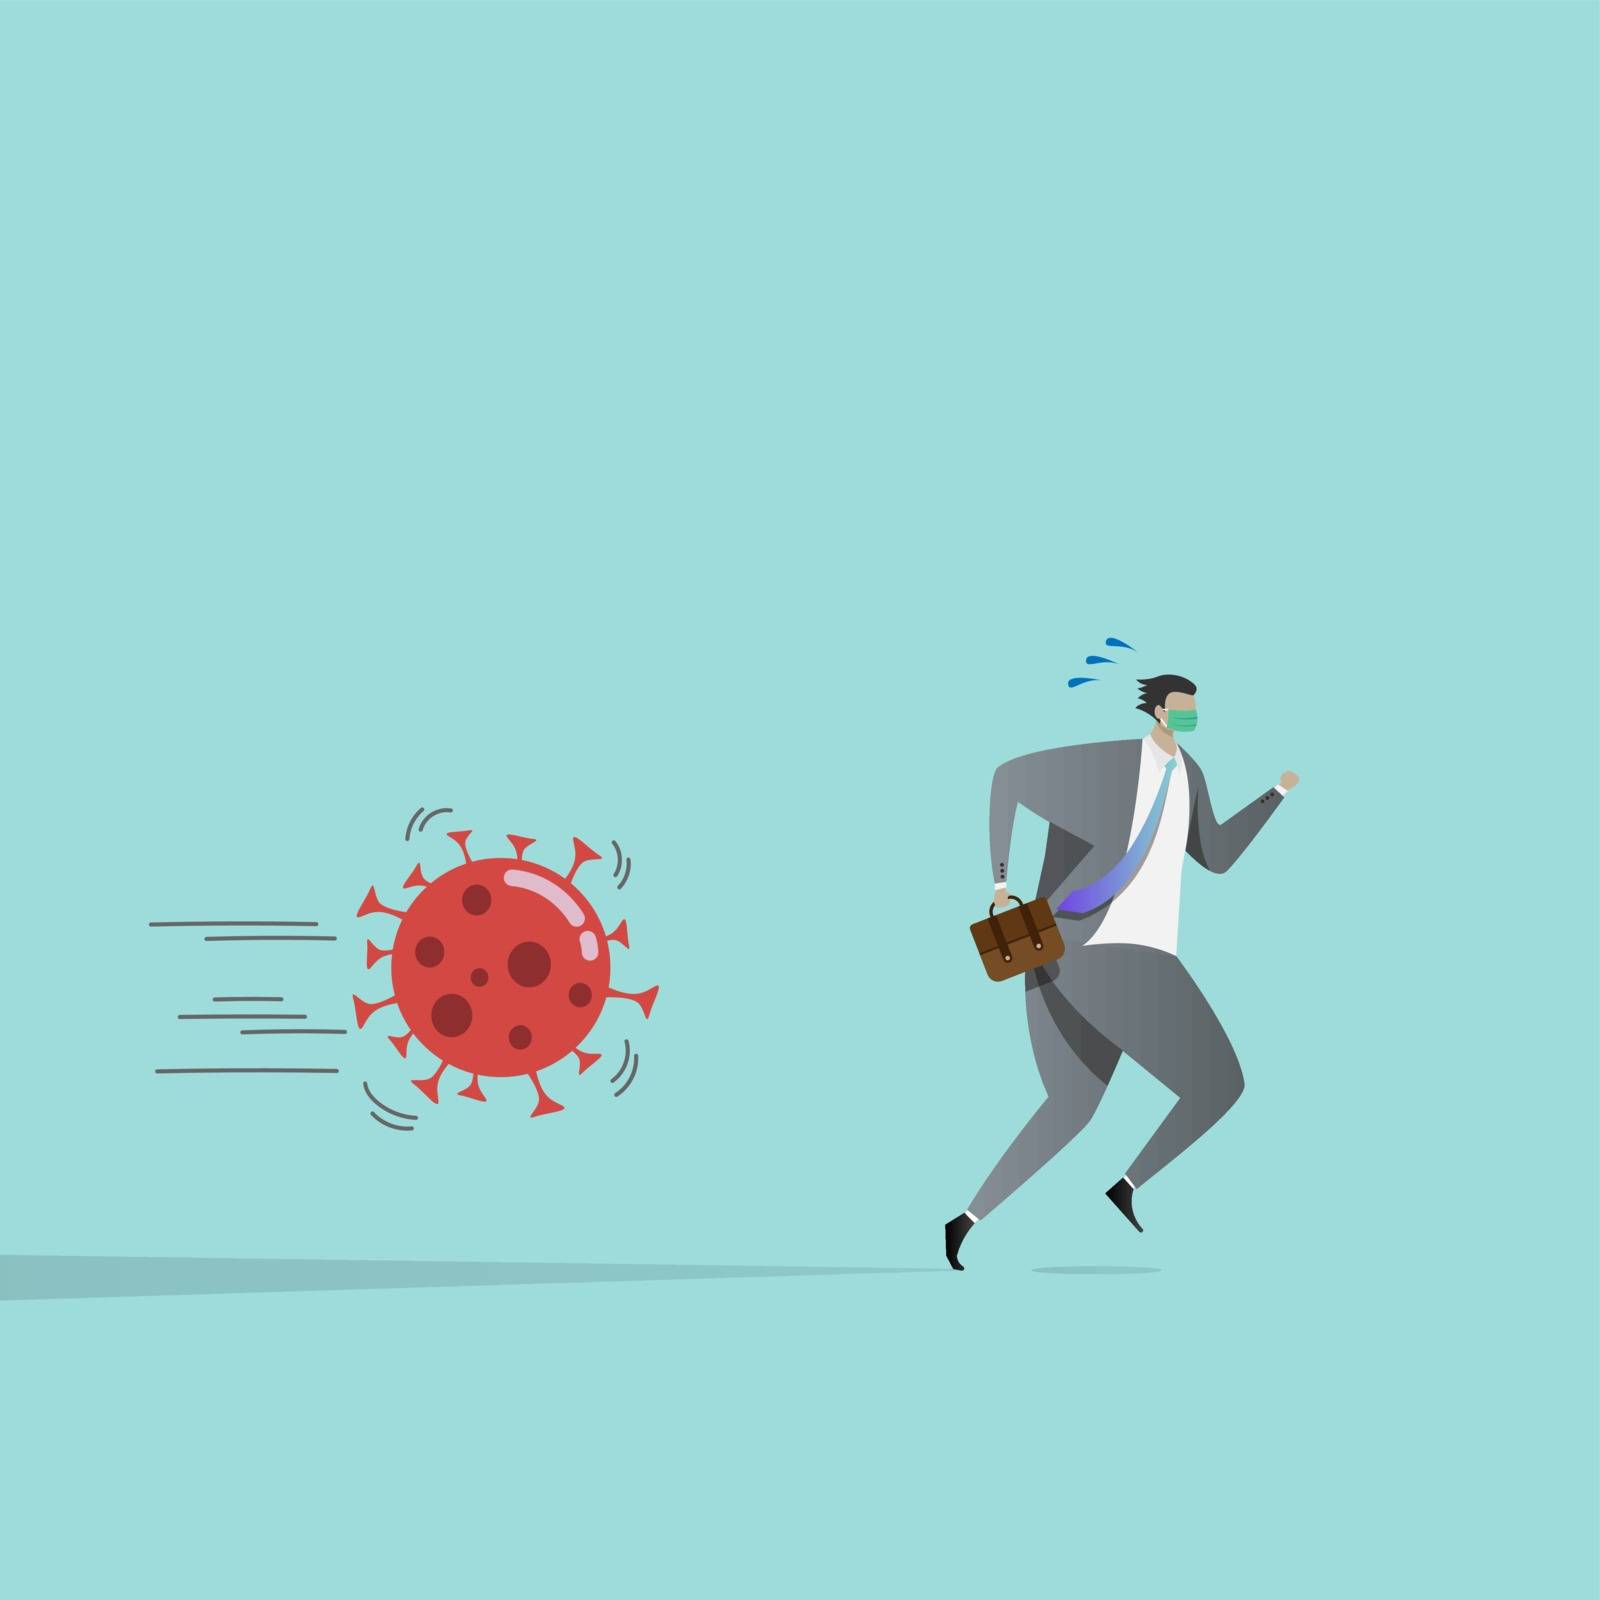 business people run away from coronavirus pathogens, affected by the outbreak. the impact of the COVID-19 epidemic causes businesses to lack revenue.